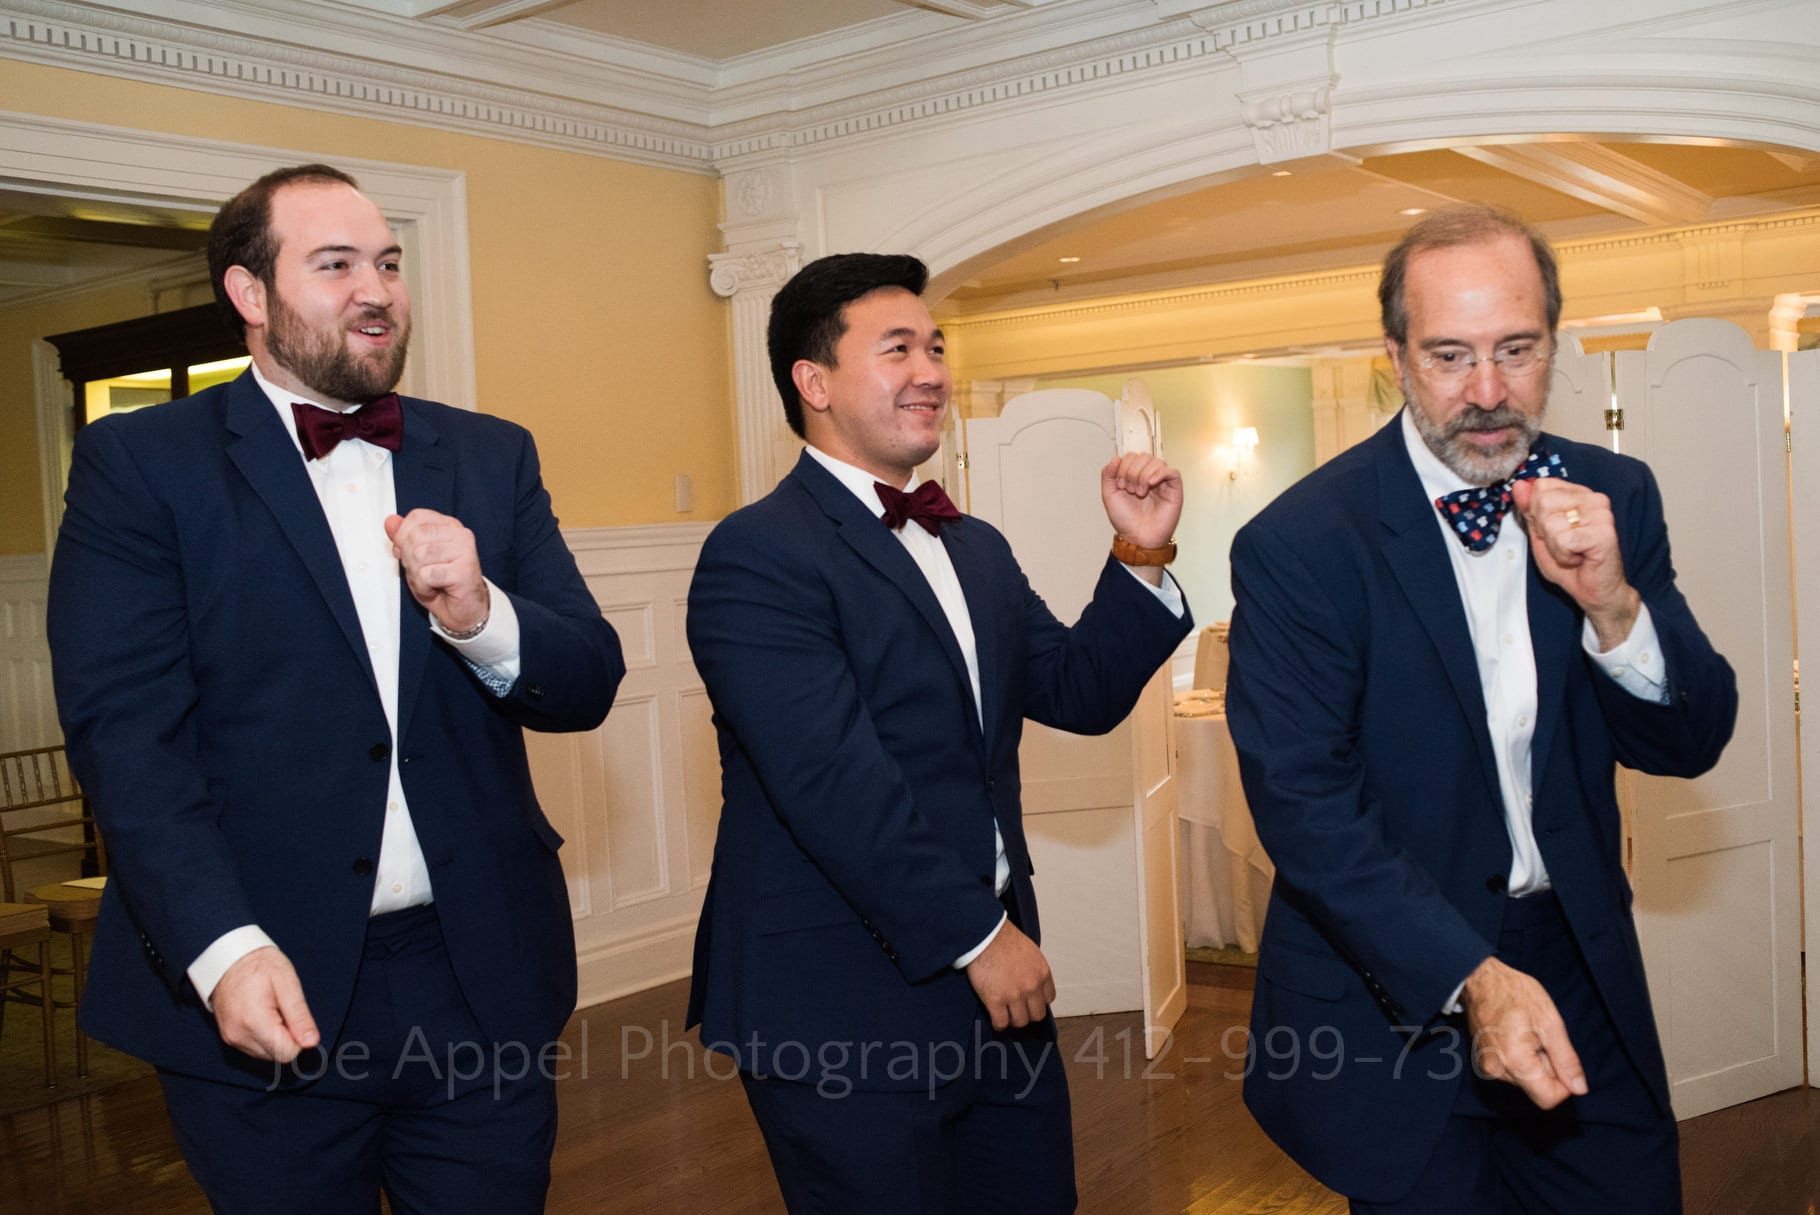 Three men wearing blue suits and bow ties practice their dance moves.